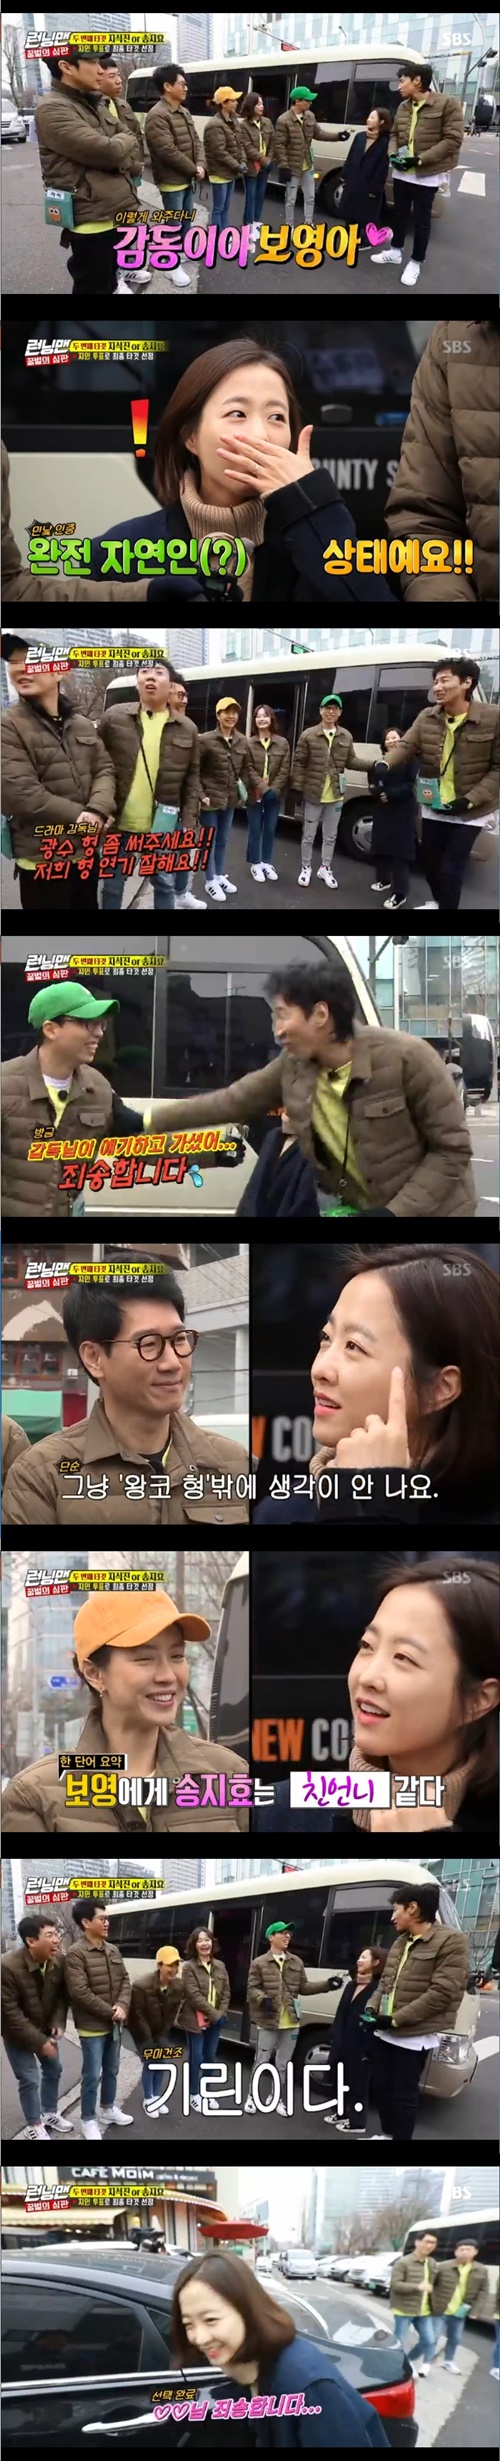 Actor Park Bo-young made a surprise appearance in Running Man.The SBS entertainment program Running Man, which aired on the afternoon of the 3rd, was featured as a honeybee. The honeybee was selected among the members and dropped in turn.Song Ji-hyo and Ji Suk-jin, who were identified as the second targets for honeybees, decided to cover the person who would be out through an acquaintance vote. The members met Park Bo-young by chance while waiting for the emperor, who was the person to vote.Park Bo-young explained that he was looking for members to attend the drama meeting.Yang asked, Write us some of our Gwangsu brothers. Then Yoo said, I heard what you said. He said, Im sorry. and laughed.Yoo Jae-Suk also gave Park Bo-young the right to vote by explaining the contents of the Bee Special, and asked him to explain the members in a word by recalling the memories of the time he appeared in Running Man.Park Bo-young defined Ji Suk-jin as Wangkos brother. On the other hand, Song Ji-hyo said pro-sister and Lee Kwang-soo said giraffe.Park Bo-young went to a quiet place without members and talked to the production team about the voting contents a little, and then hurried to the drama meeting place, saying, Im sorry.